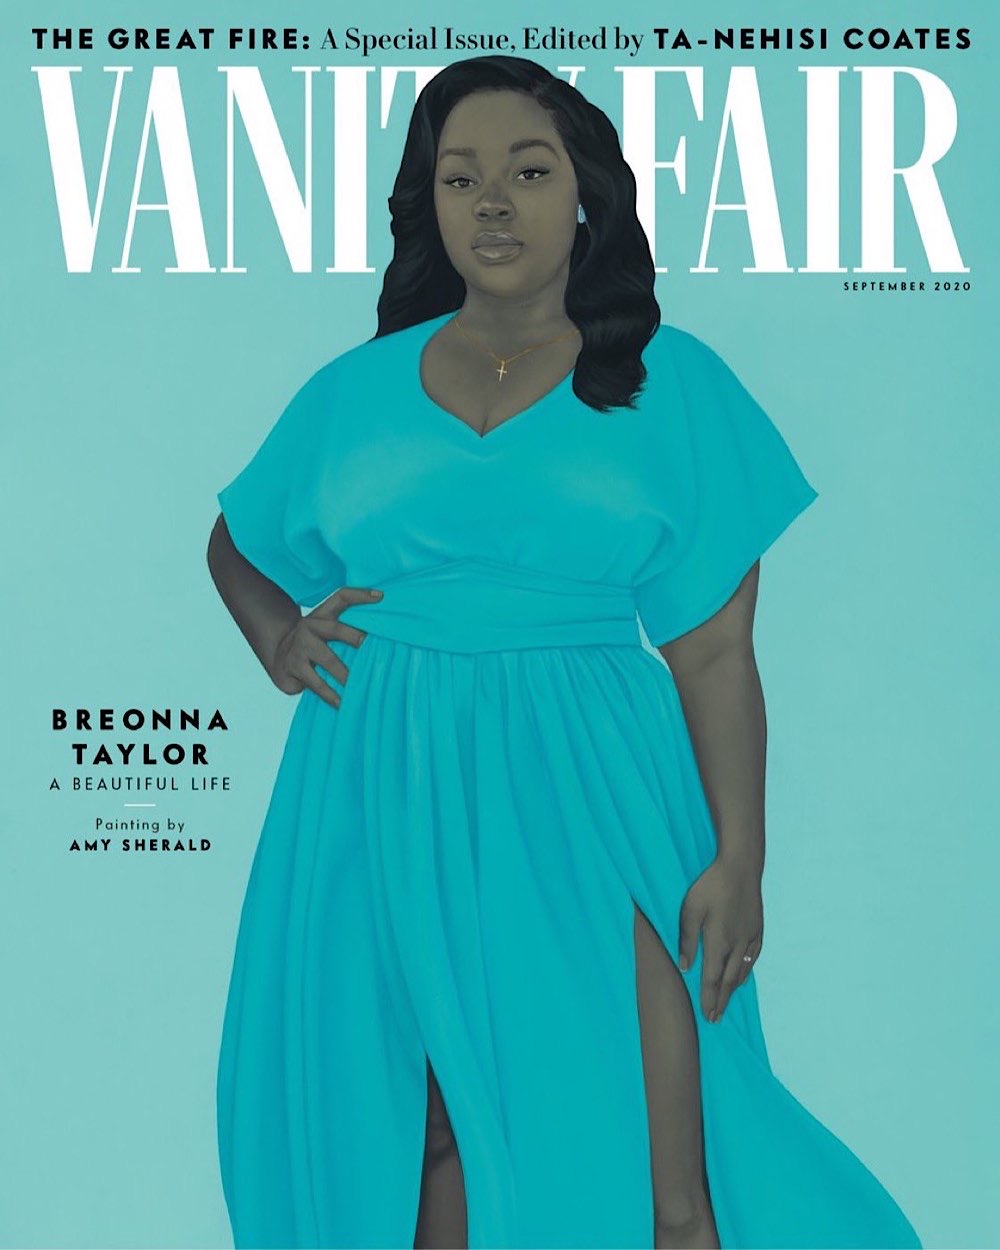 Amy Sherald's portrait of Breonna Taylor